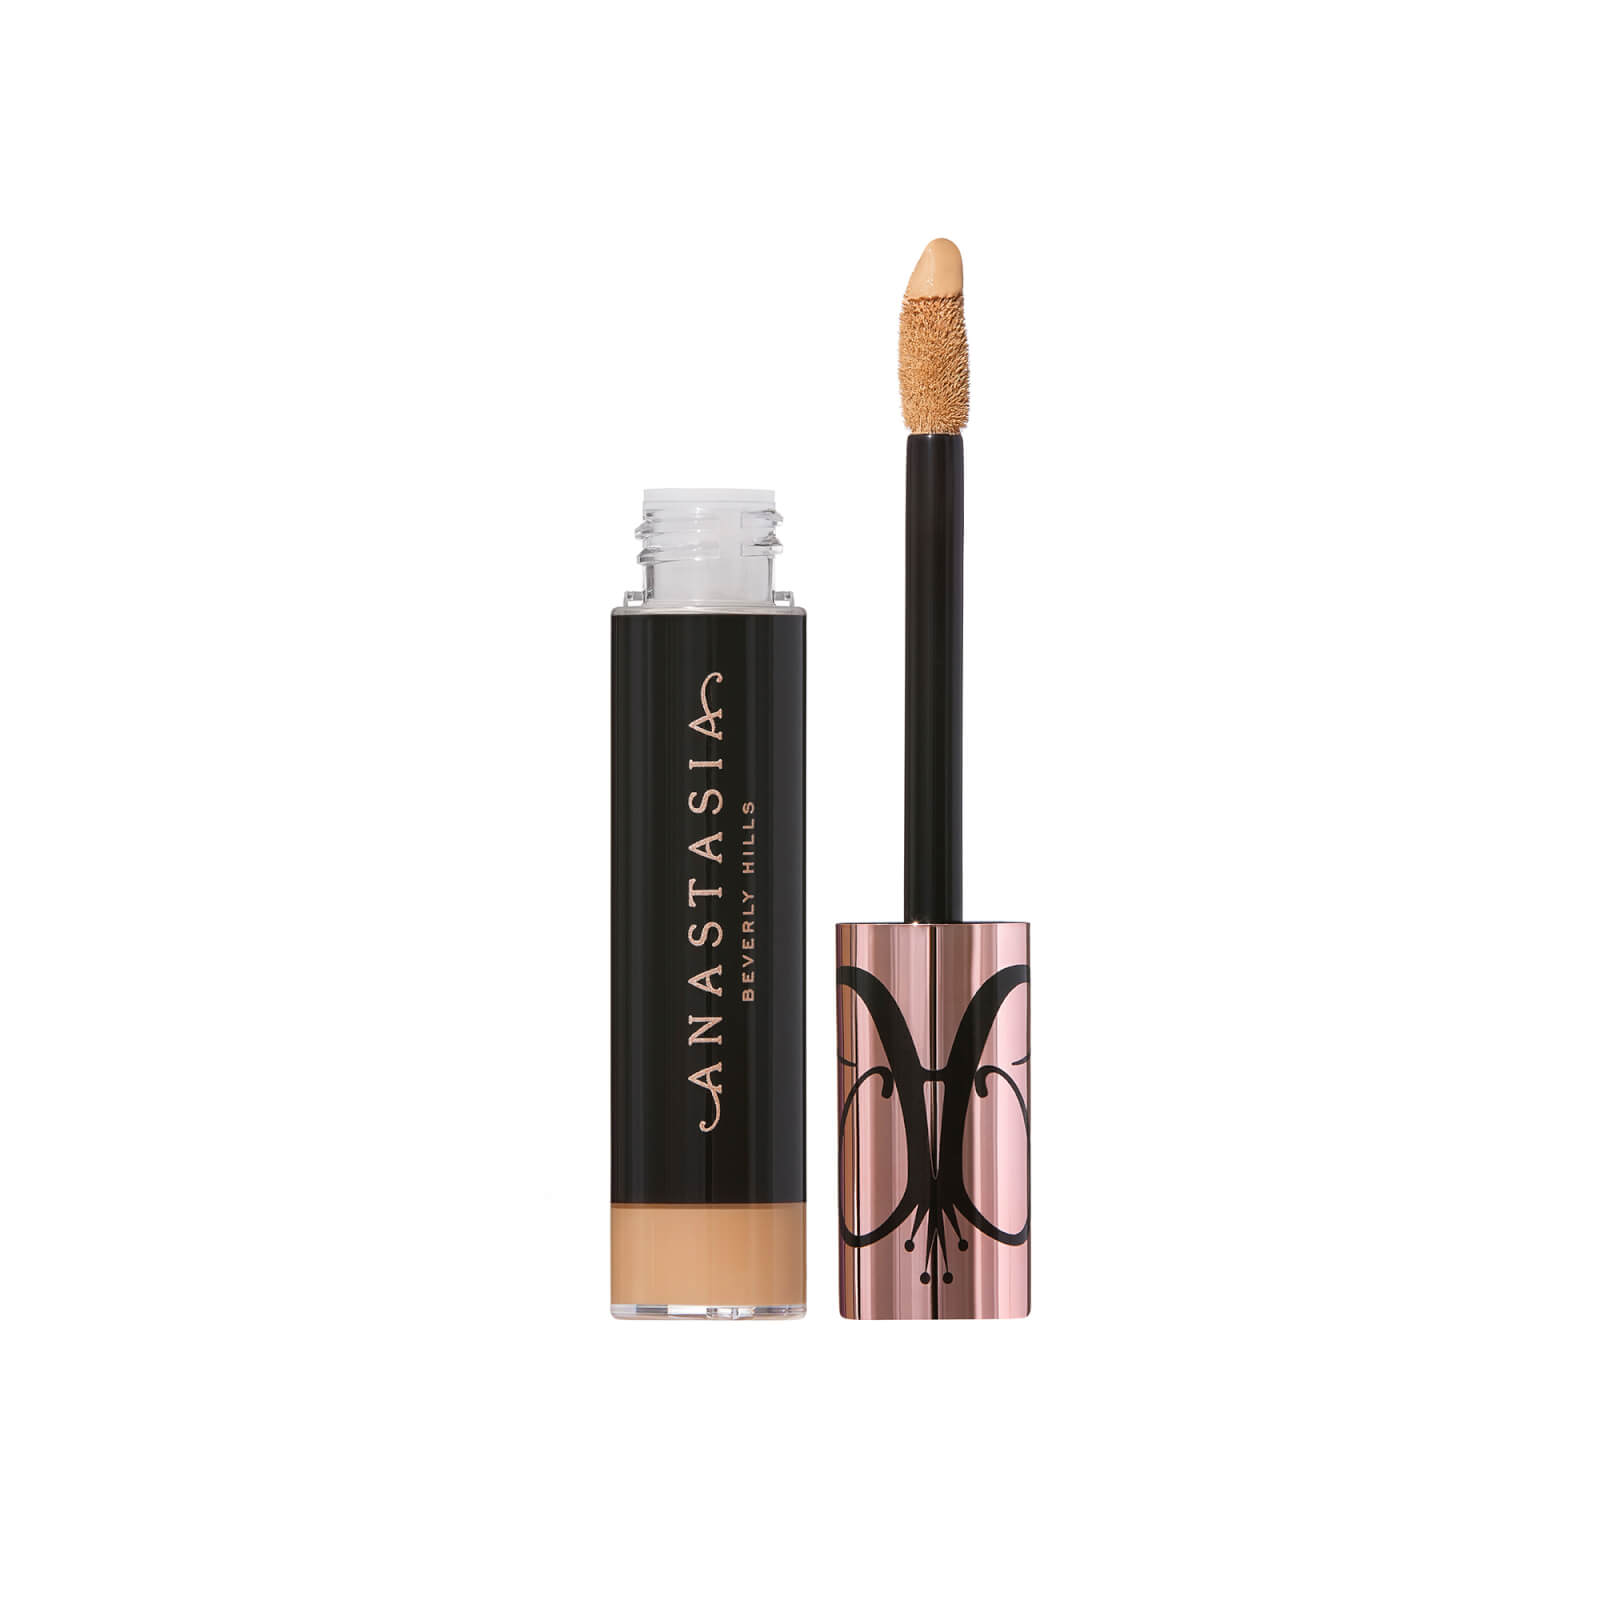 Anastasia Beverly Hills Magic Touch Concealer 12ml (Various Shades) - 16